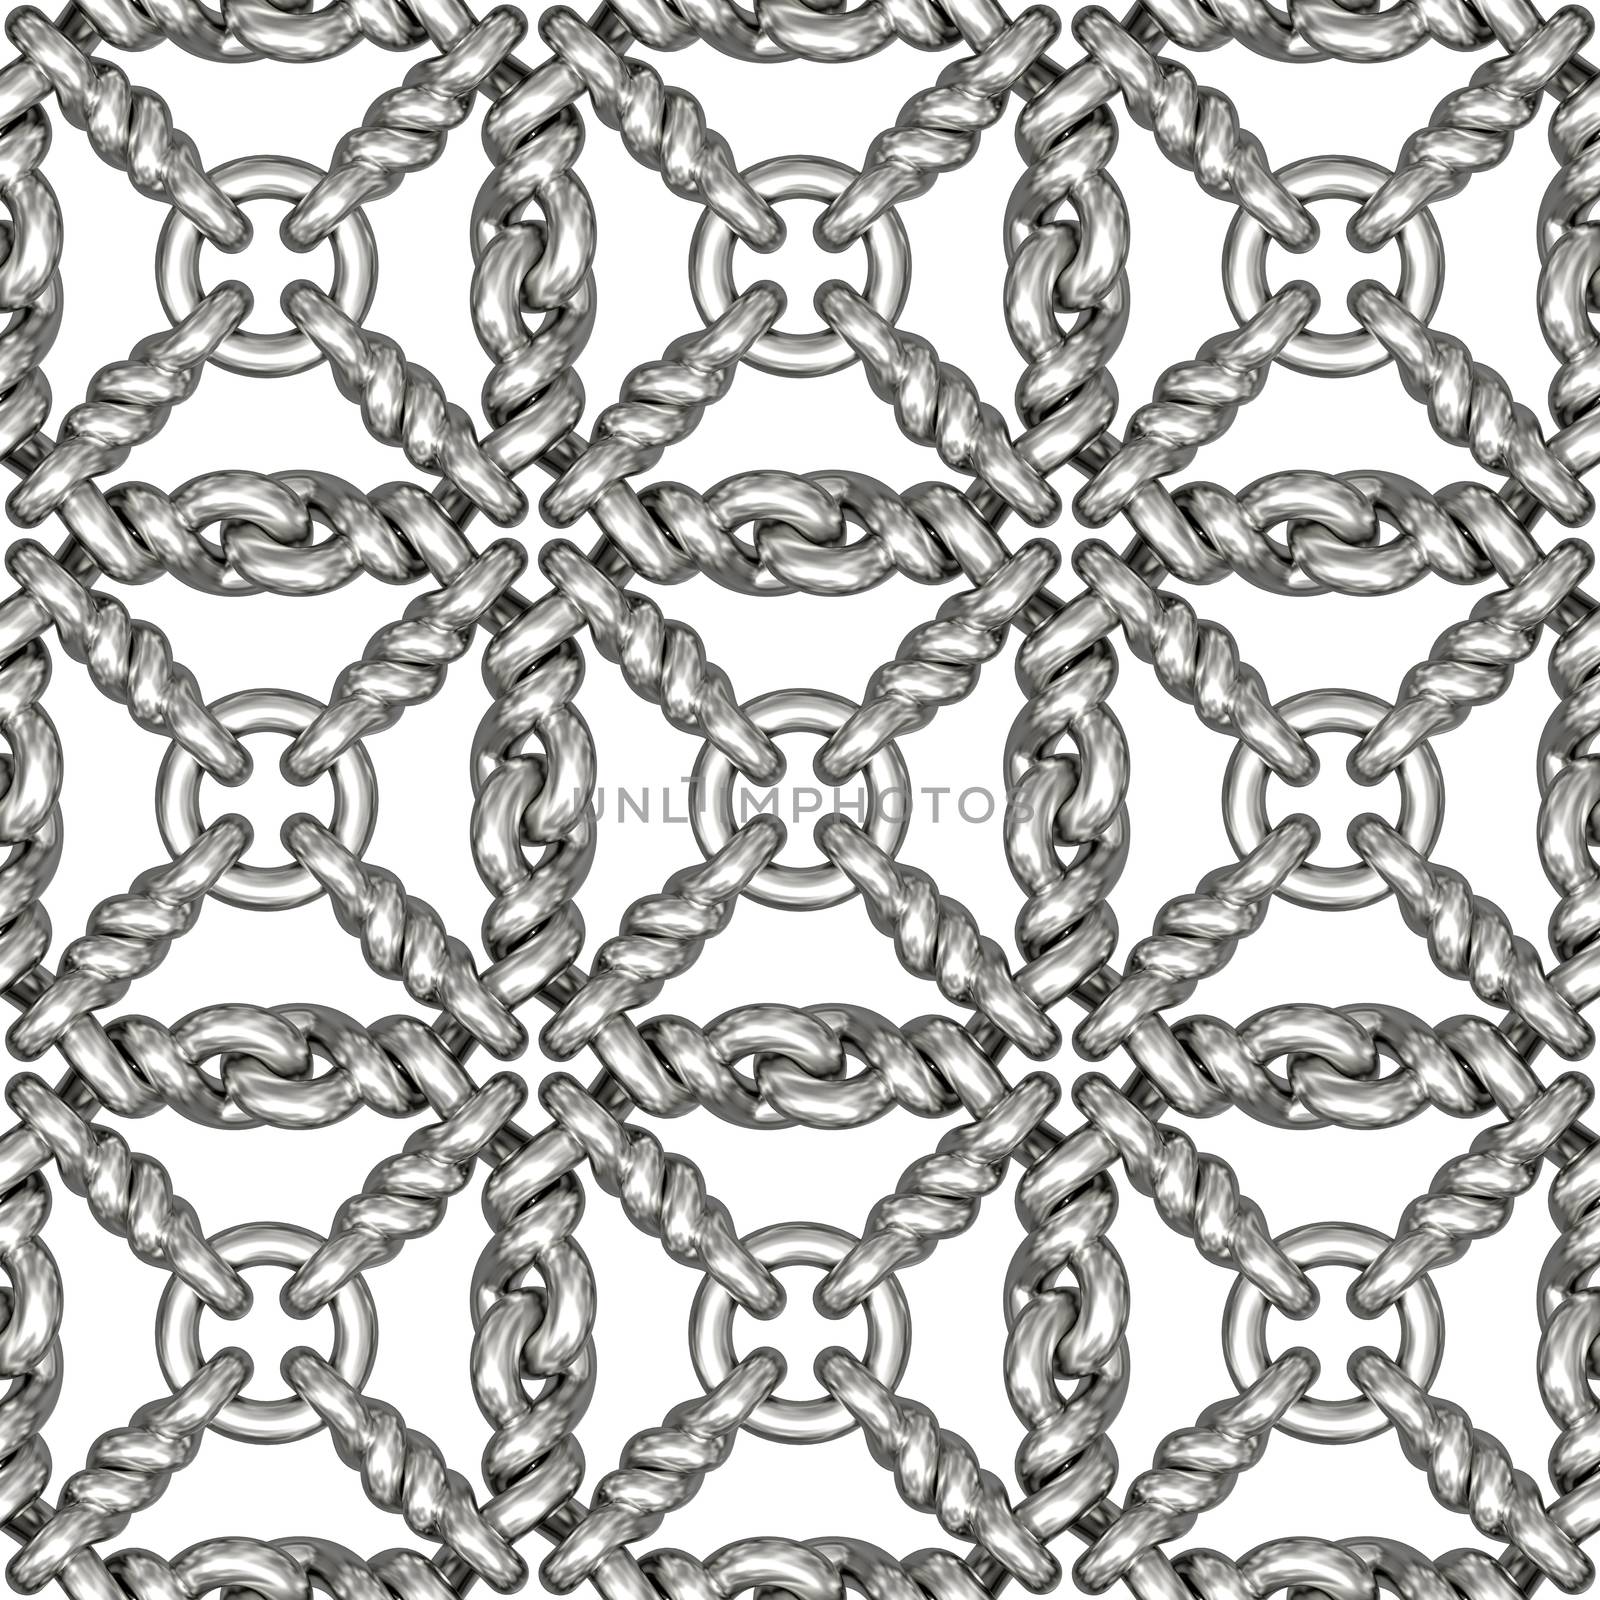 Seamless pattern of silver wire mesh or fence on white by oneo